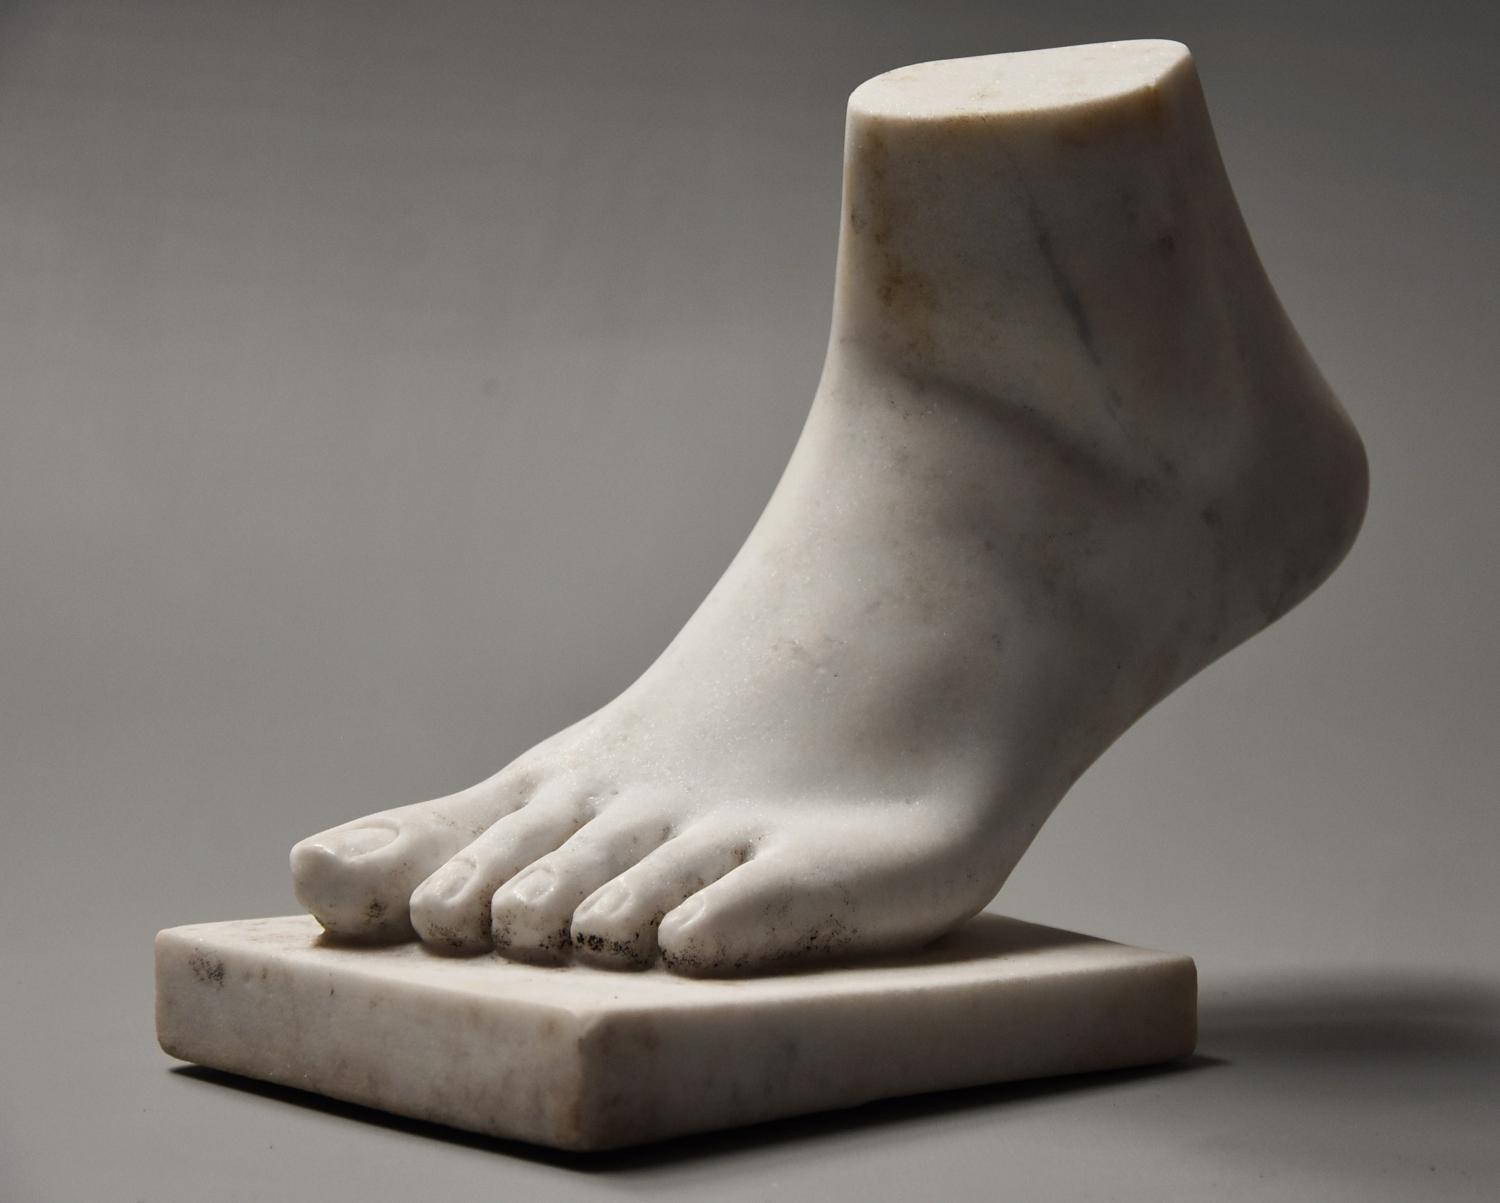 19thc Grand Tour style marble sculpture of a foot, after the Antique